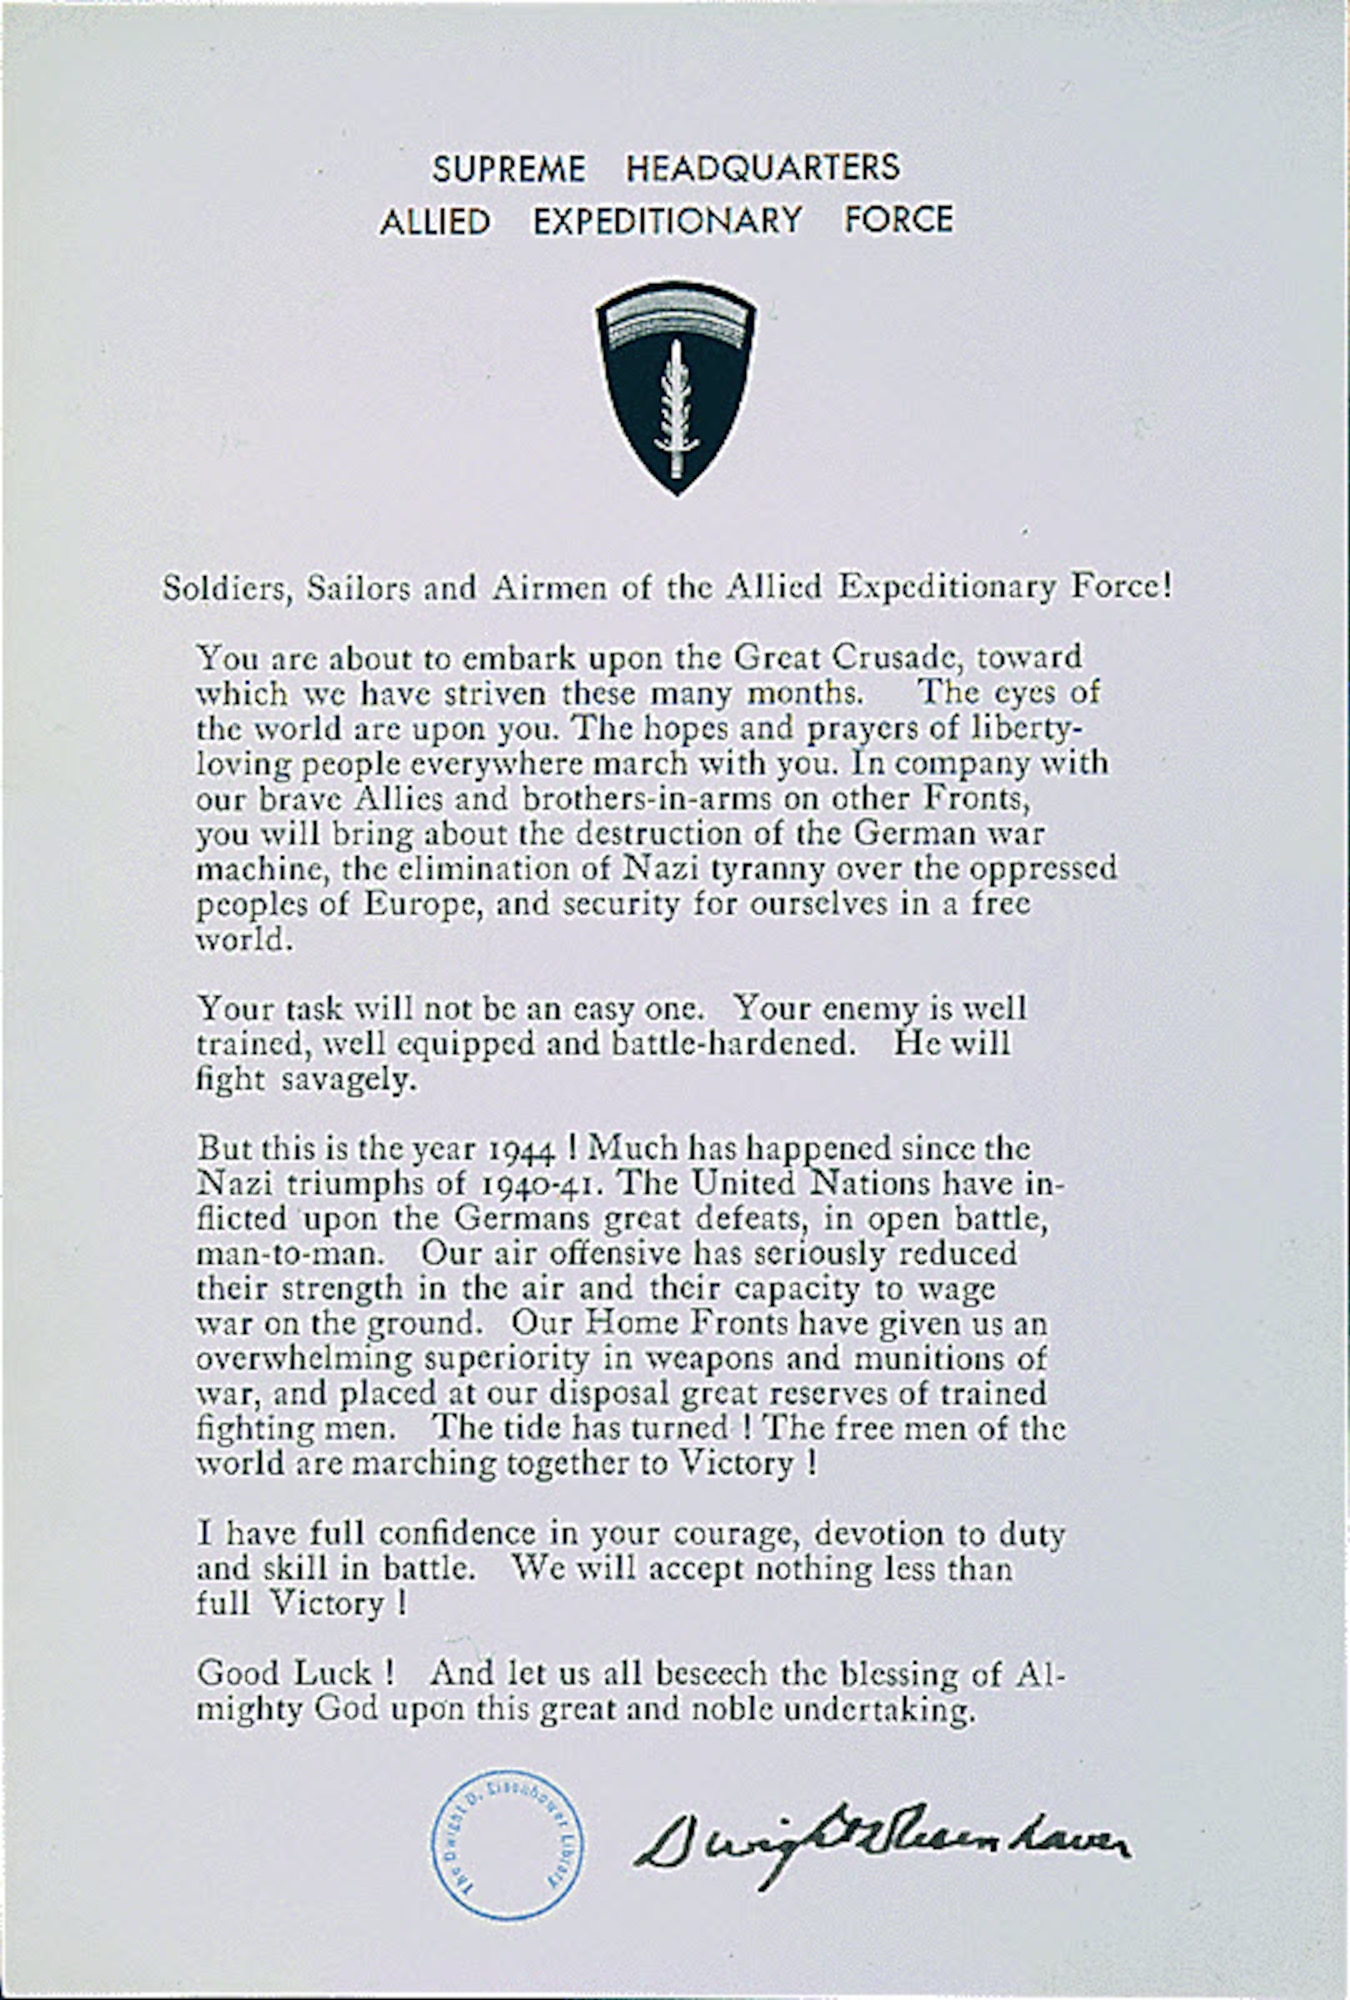 The statement given by Gen. of the Army Dwight D. Eisenhower, the supreme allied commander, to the forces under his command during the beginning phases of Operation Neptune, the plan for the initial assault in Normandy as part of Operation Overlord. The Soldiers, Sailors and Airmen who took part in the operations were from countries all around the world including the United States, the British Commonwealth, the Netherlands and Poland. (National Archives courtesy photo)